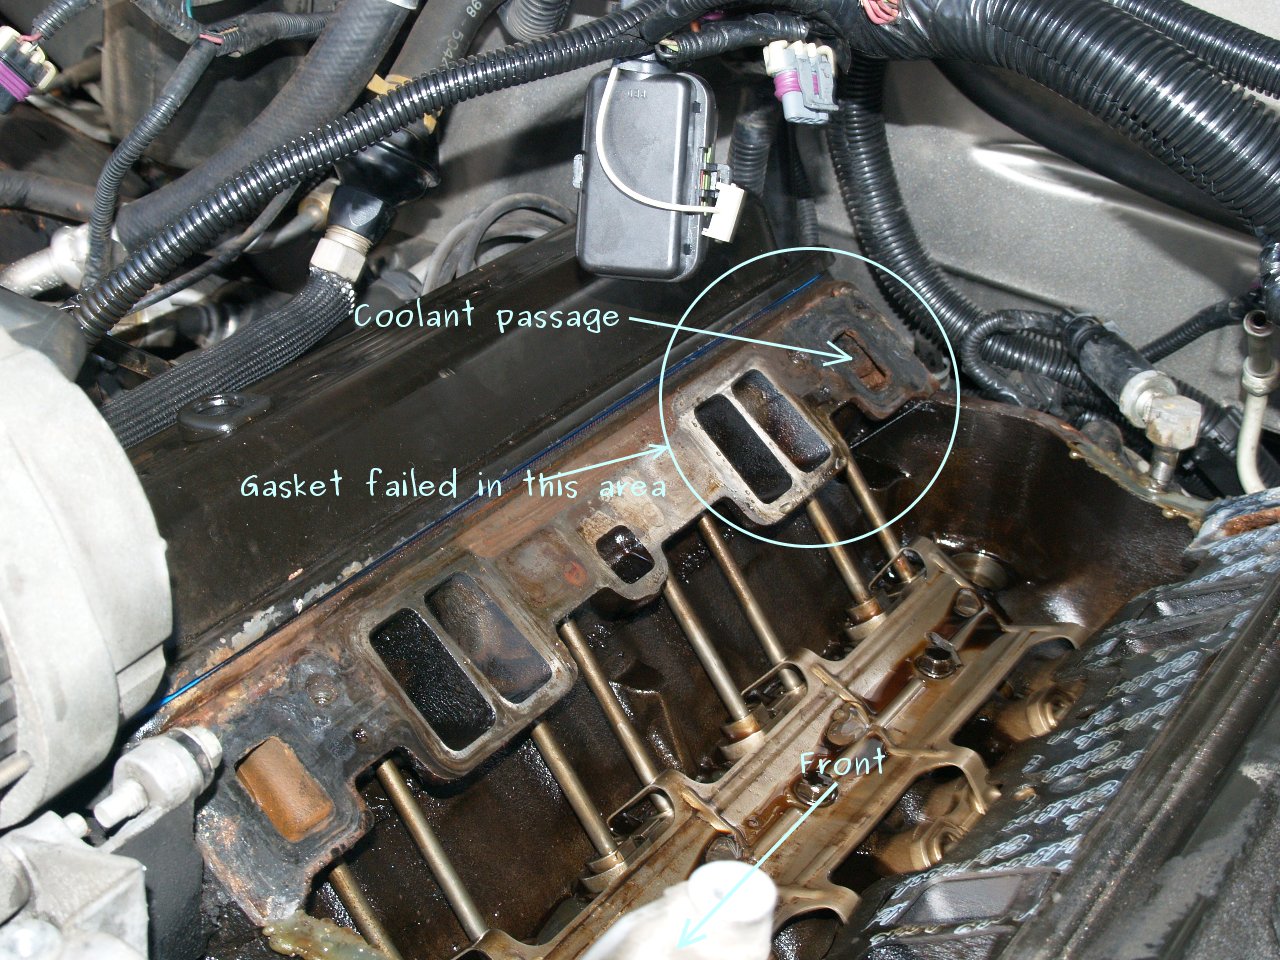 See P3008 in engine